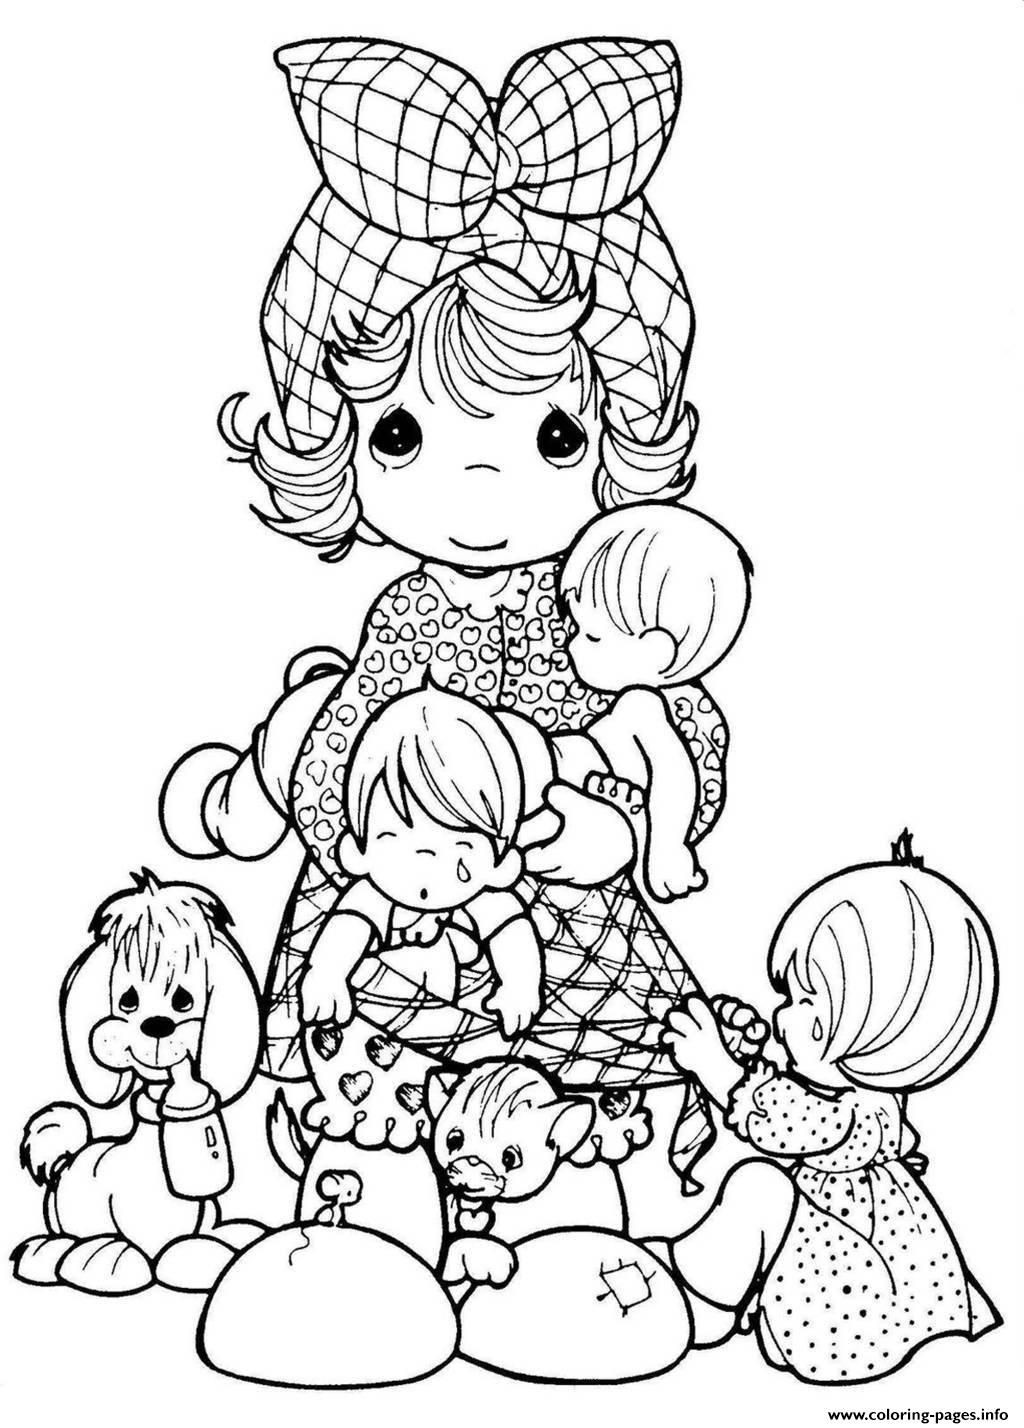 My Precious Moments Coloring Pages Boys
 Print adult precious moments coloring pages